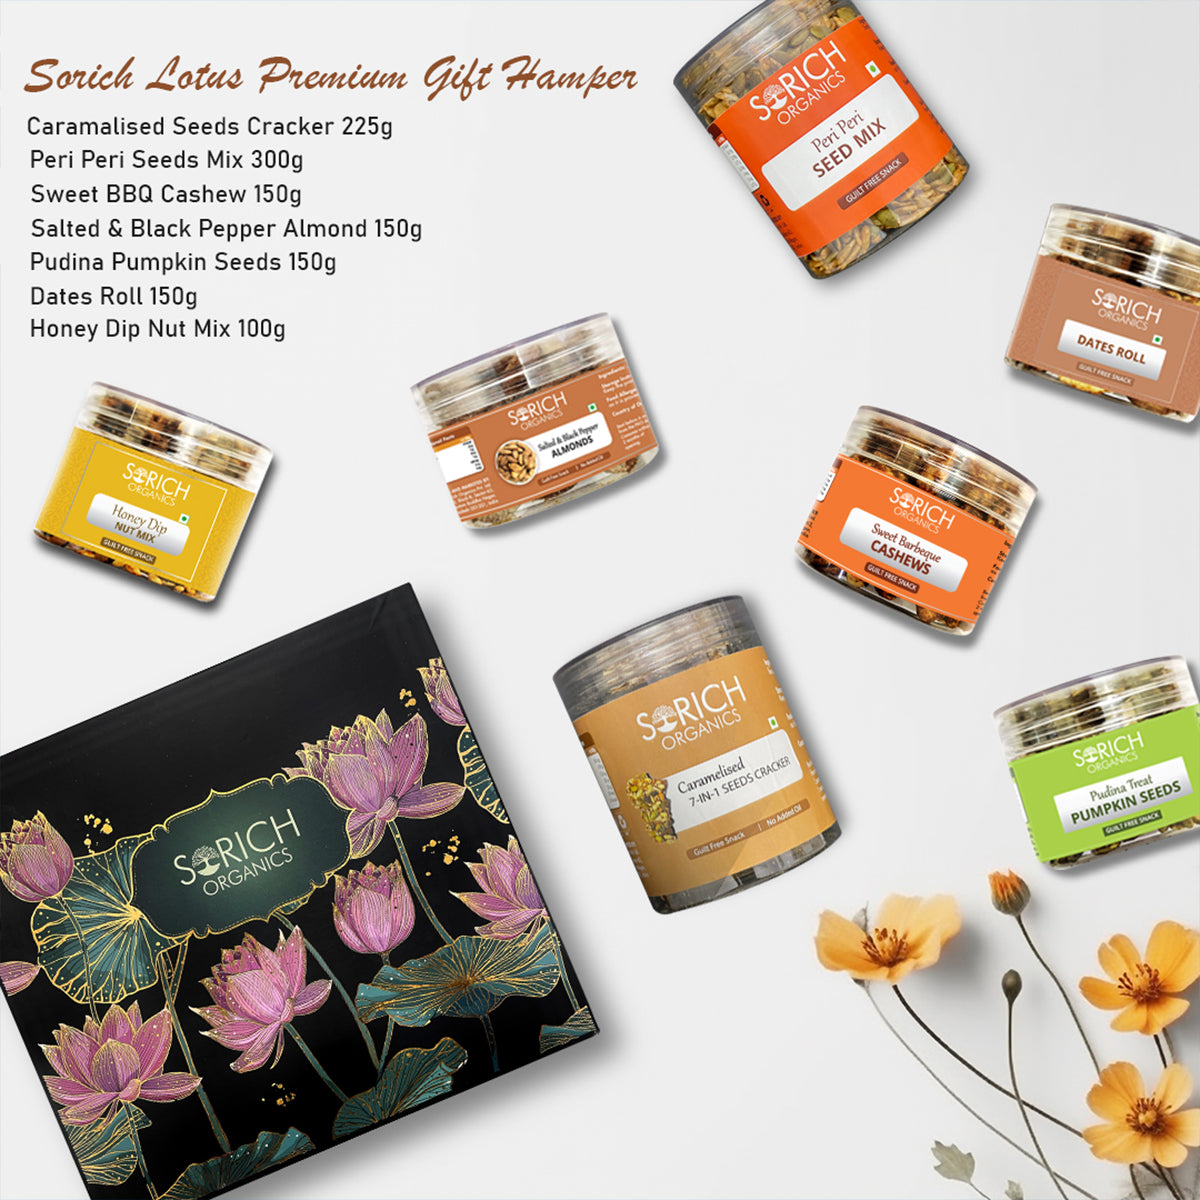 Lotus Premium Diwali Gift Hamper for Family and Friends | Caramalised Cracker 225g, Peri Peri Seeds Mix 300g, Salted & Black Pepper Almond 150g, Sweet BBQ Cashew 150g, Pudina Pumpkin Seeds 150g, Dates Roll 150g - Sorich